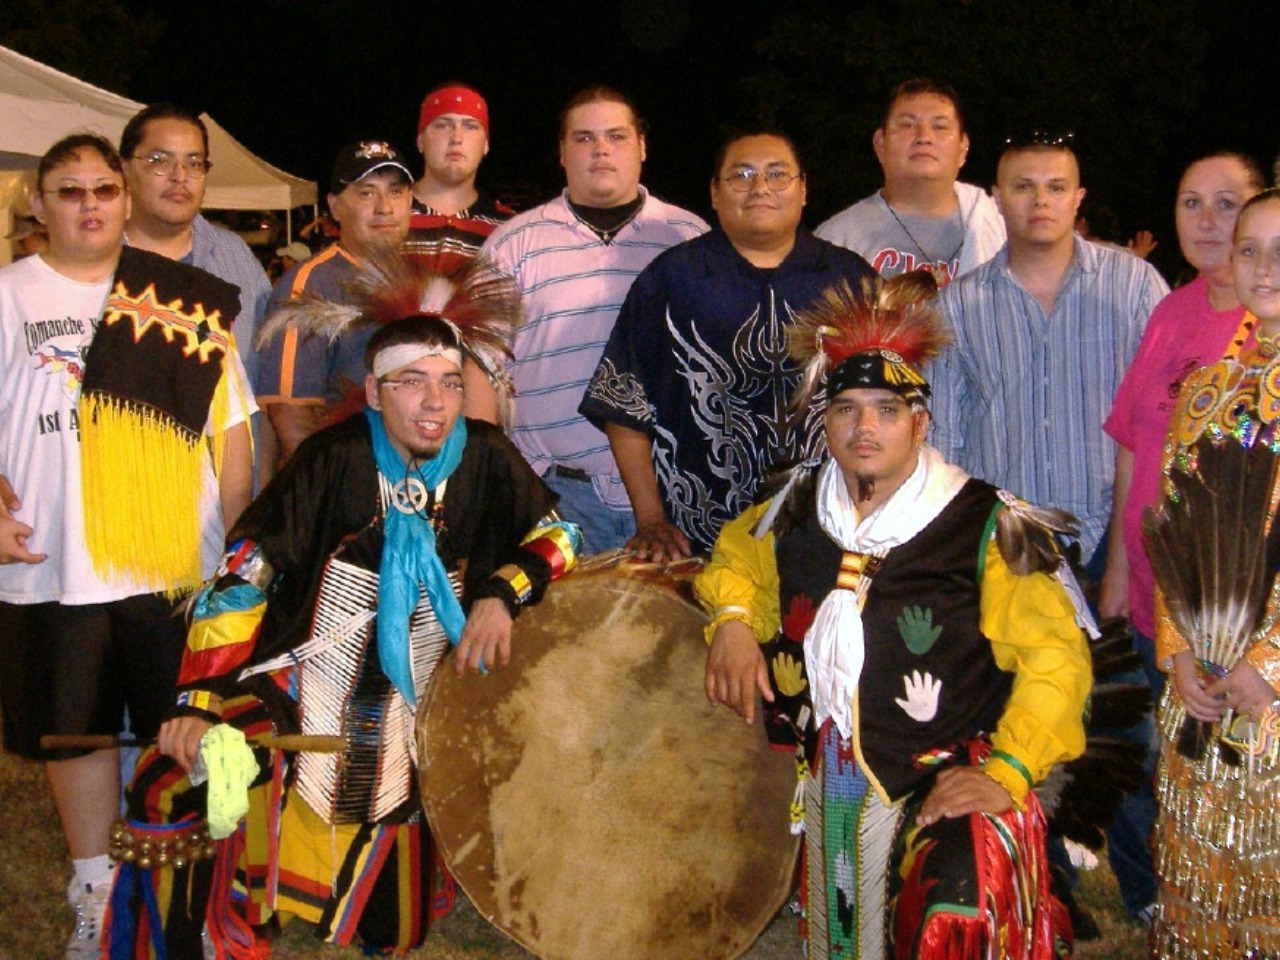 Bad Water Singers bought 3 powwow drums from Drum People